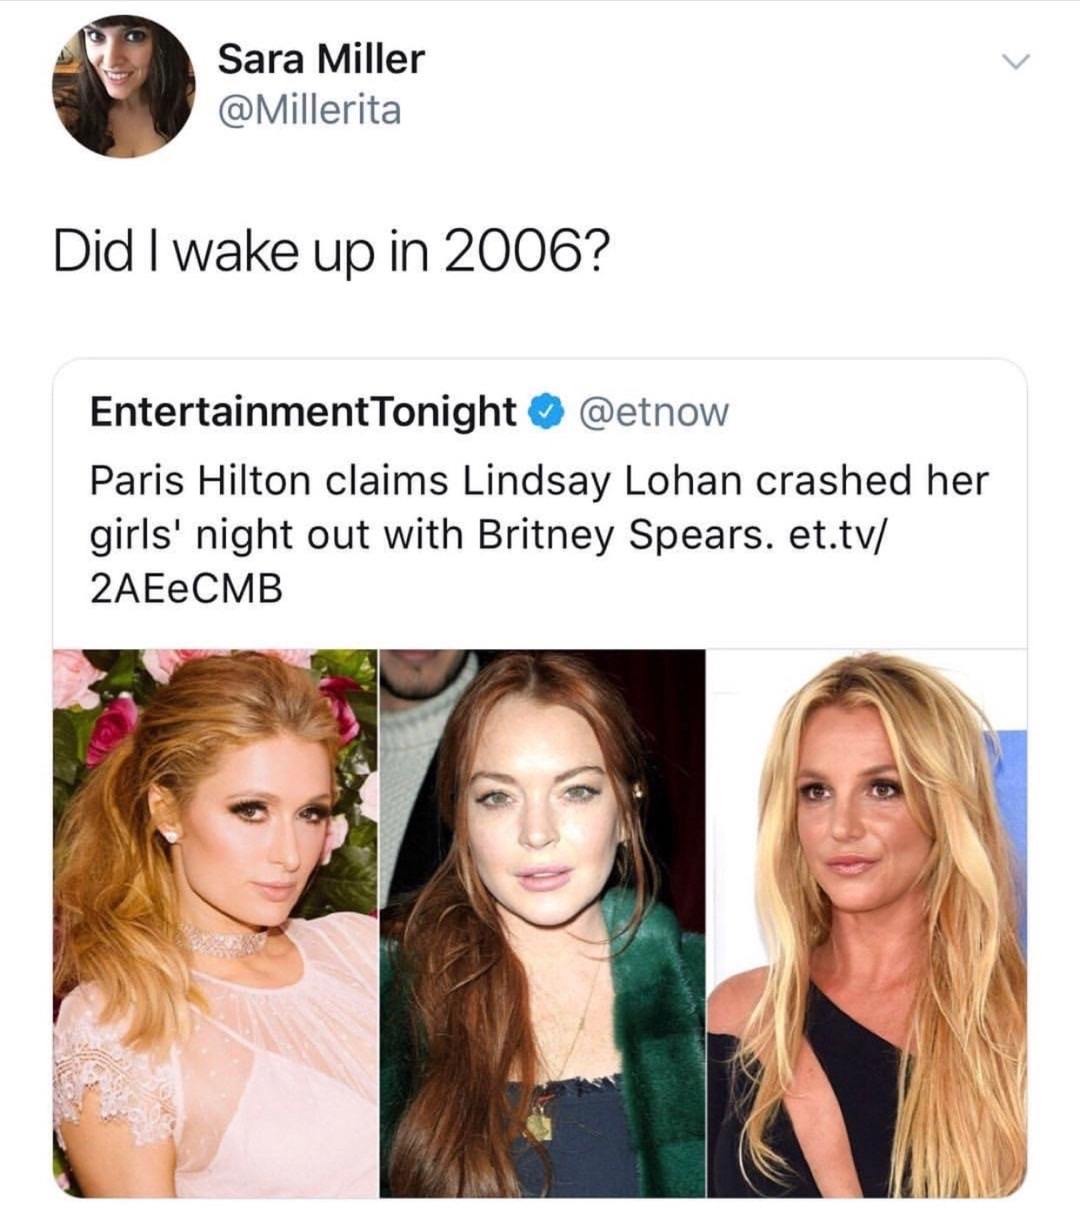 meme stream - laugh fresh memes - Sara Miller Did I wake up in 2006? Entertainment Tonight Paris Hilton claims Lindsay Lohan crashed her girls' night out with Britney Spears. et.tv 2AEECMB